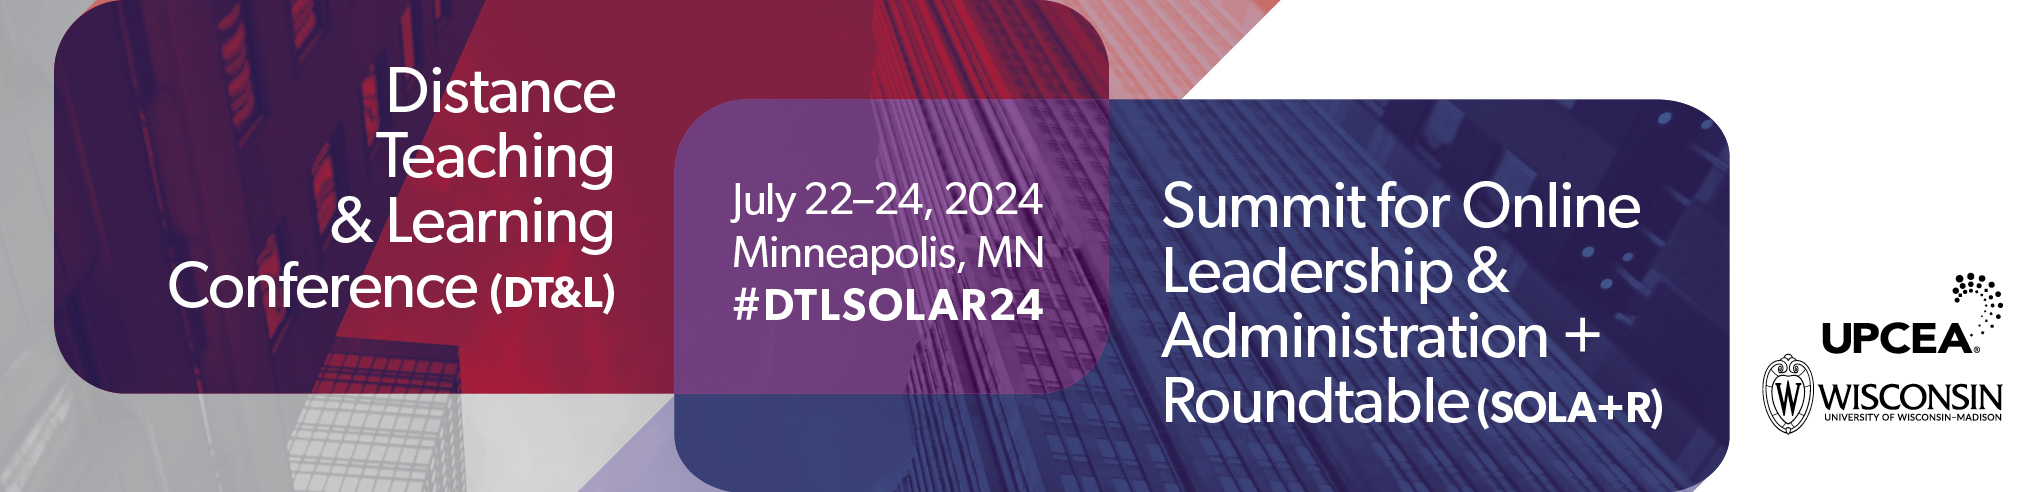 2024 SOLA+R and DT&L Conference | July 22-24, 2024 | Minneapolis, MN